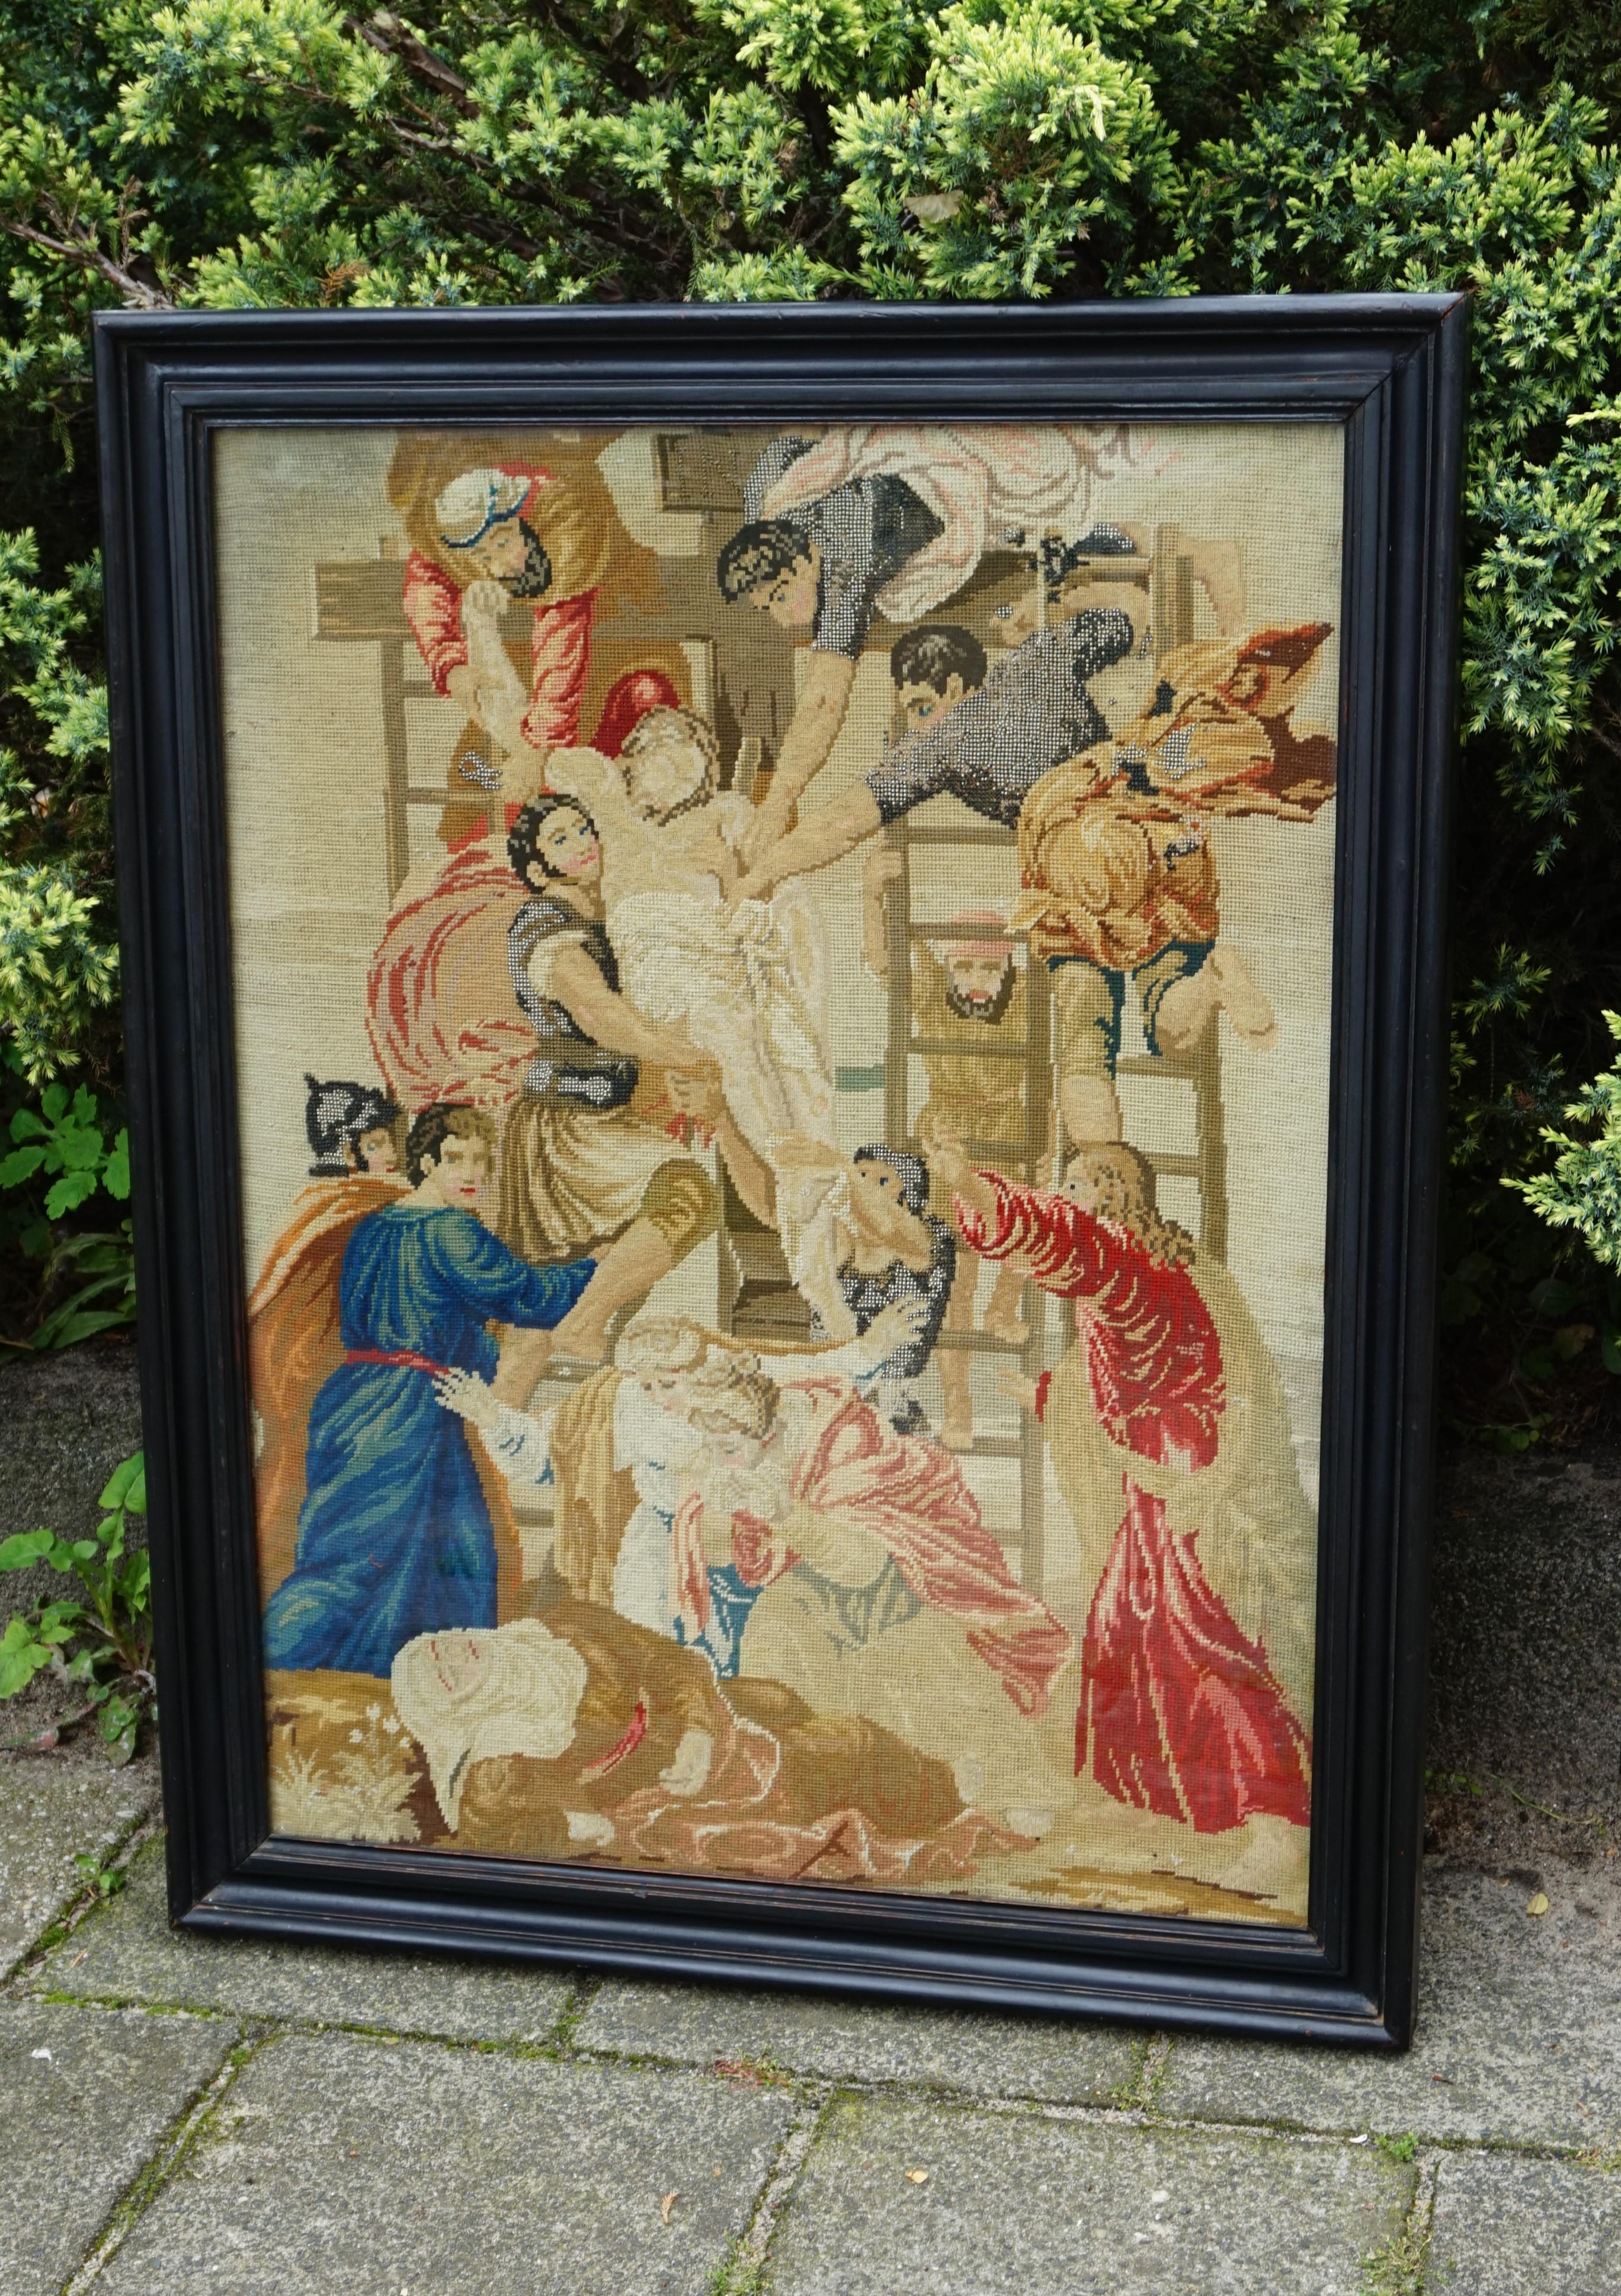 European Stunning Mid-1800s Handcrafted Embroidery of Jesus' Descent from the Cross For Sale